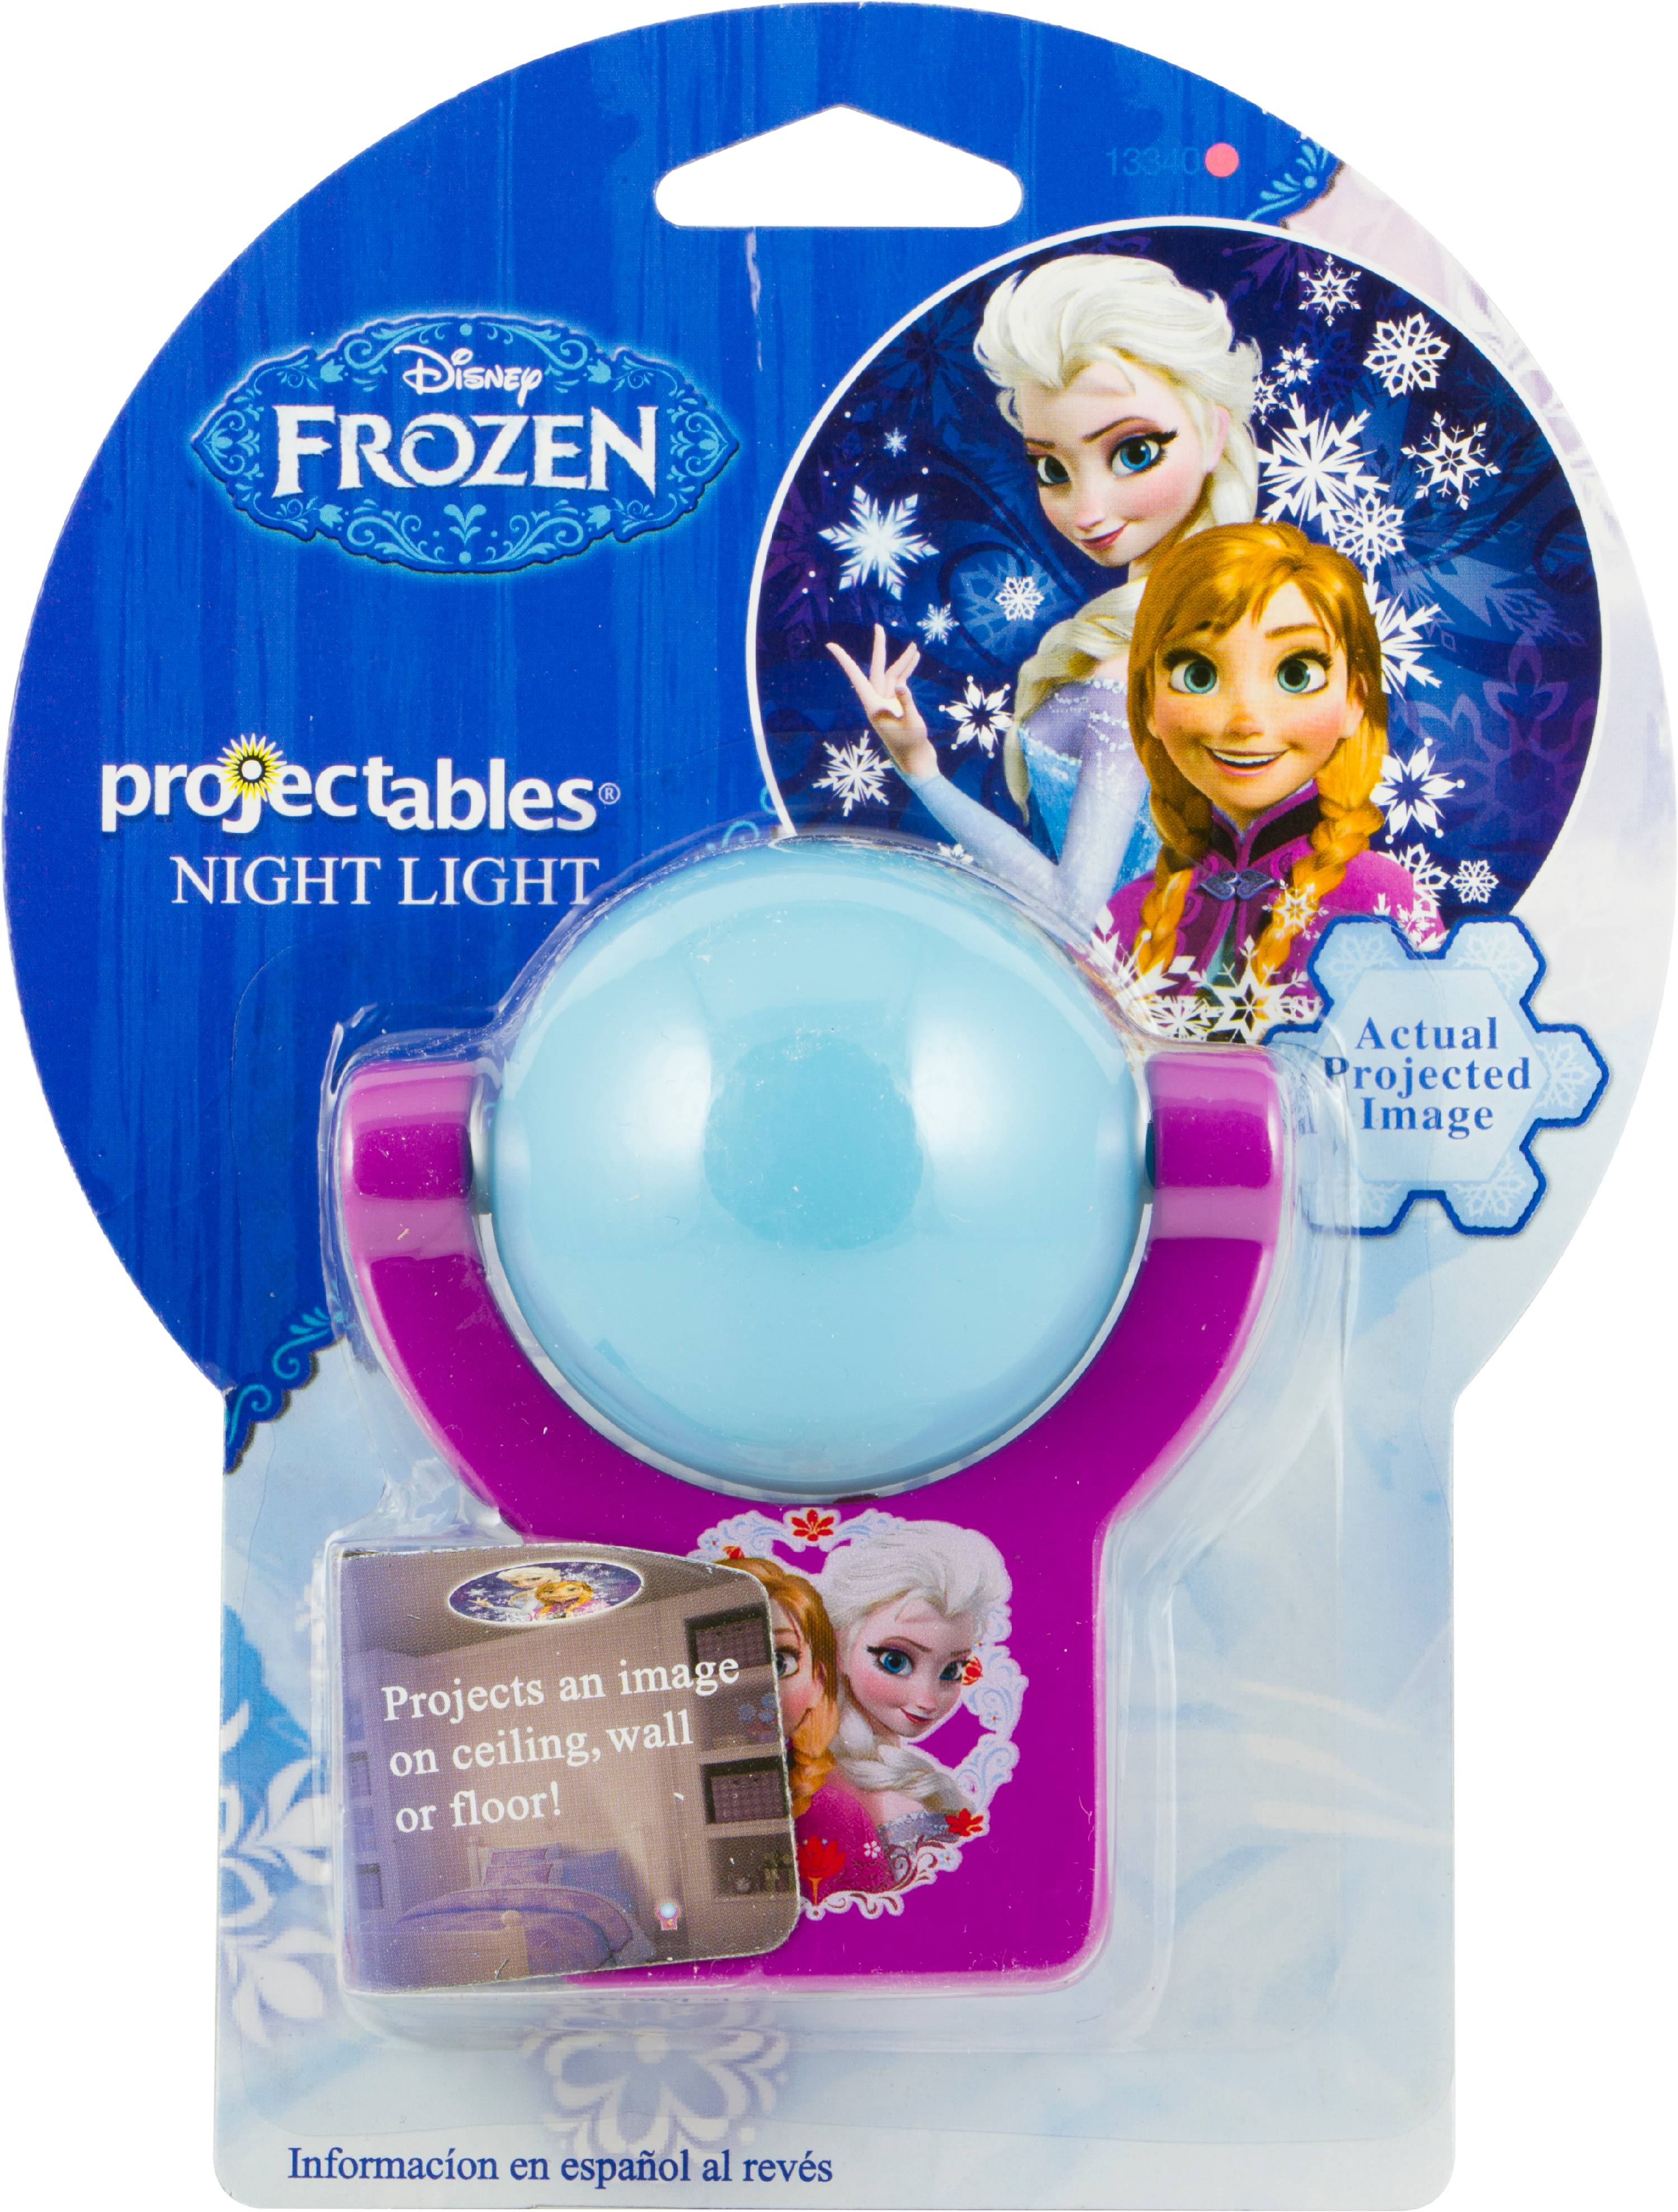 Projectables Disney Frozen LED Plug-In Night Light, Elsa & Anna, 13340 - image 5 of 5